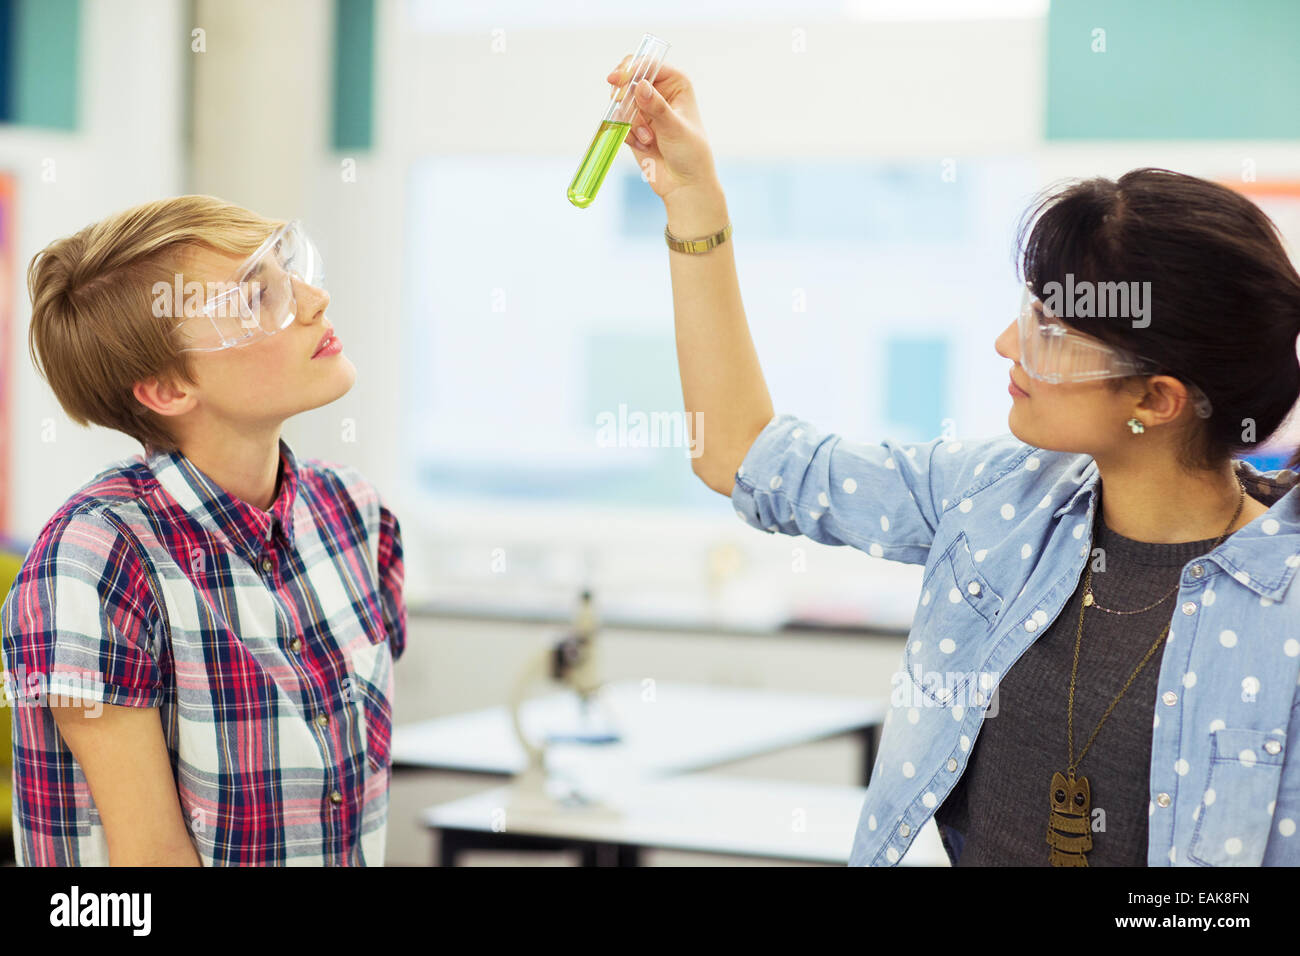 Teacher and student during chemistry lesson, wearing protective eyewear and looking at test tube with green liquid Stock Photo